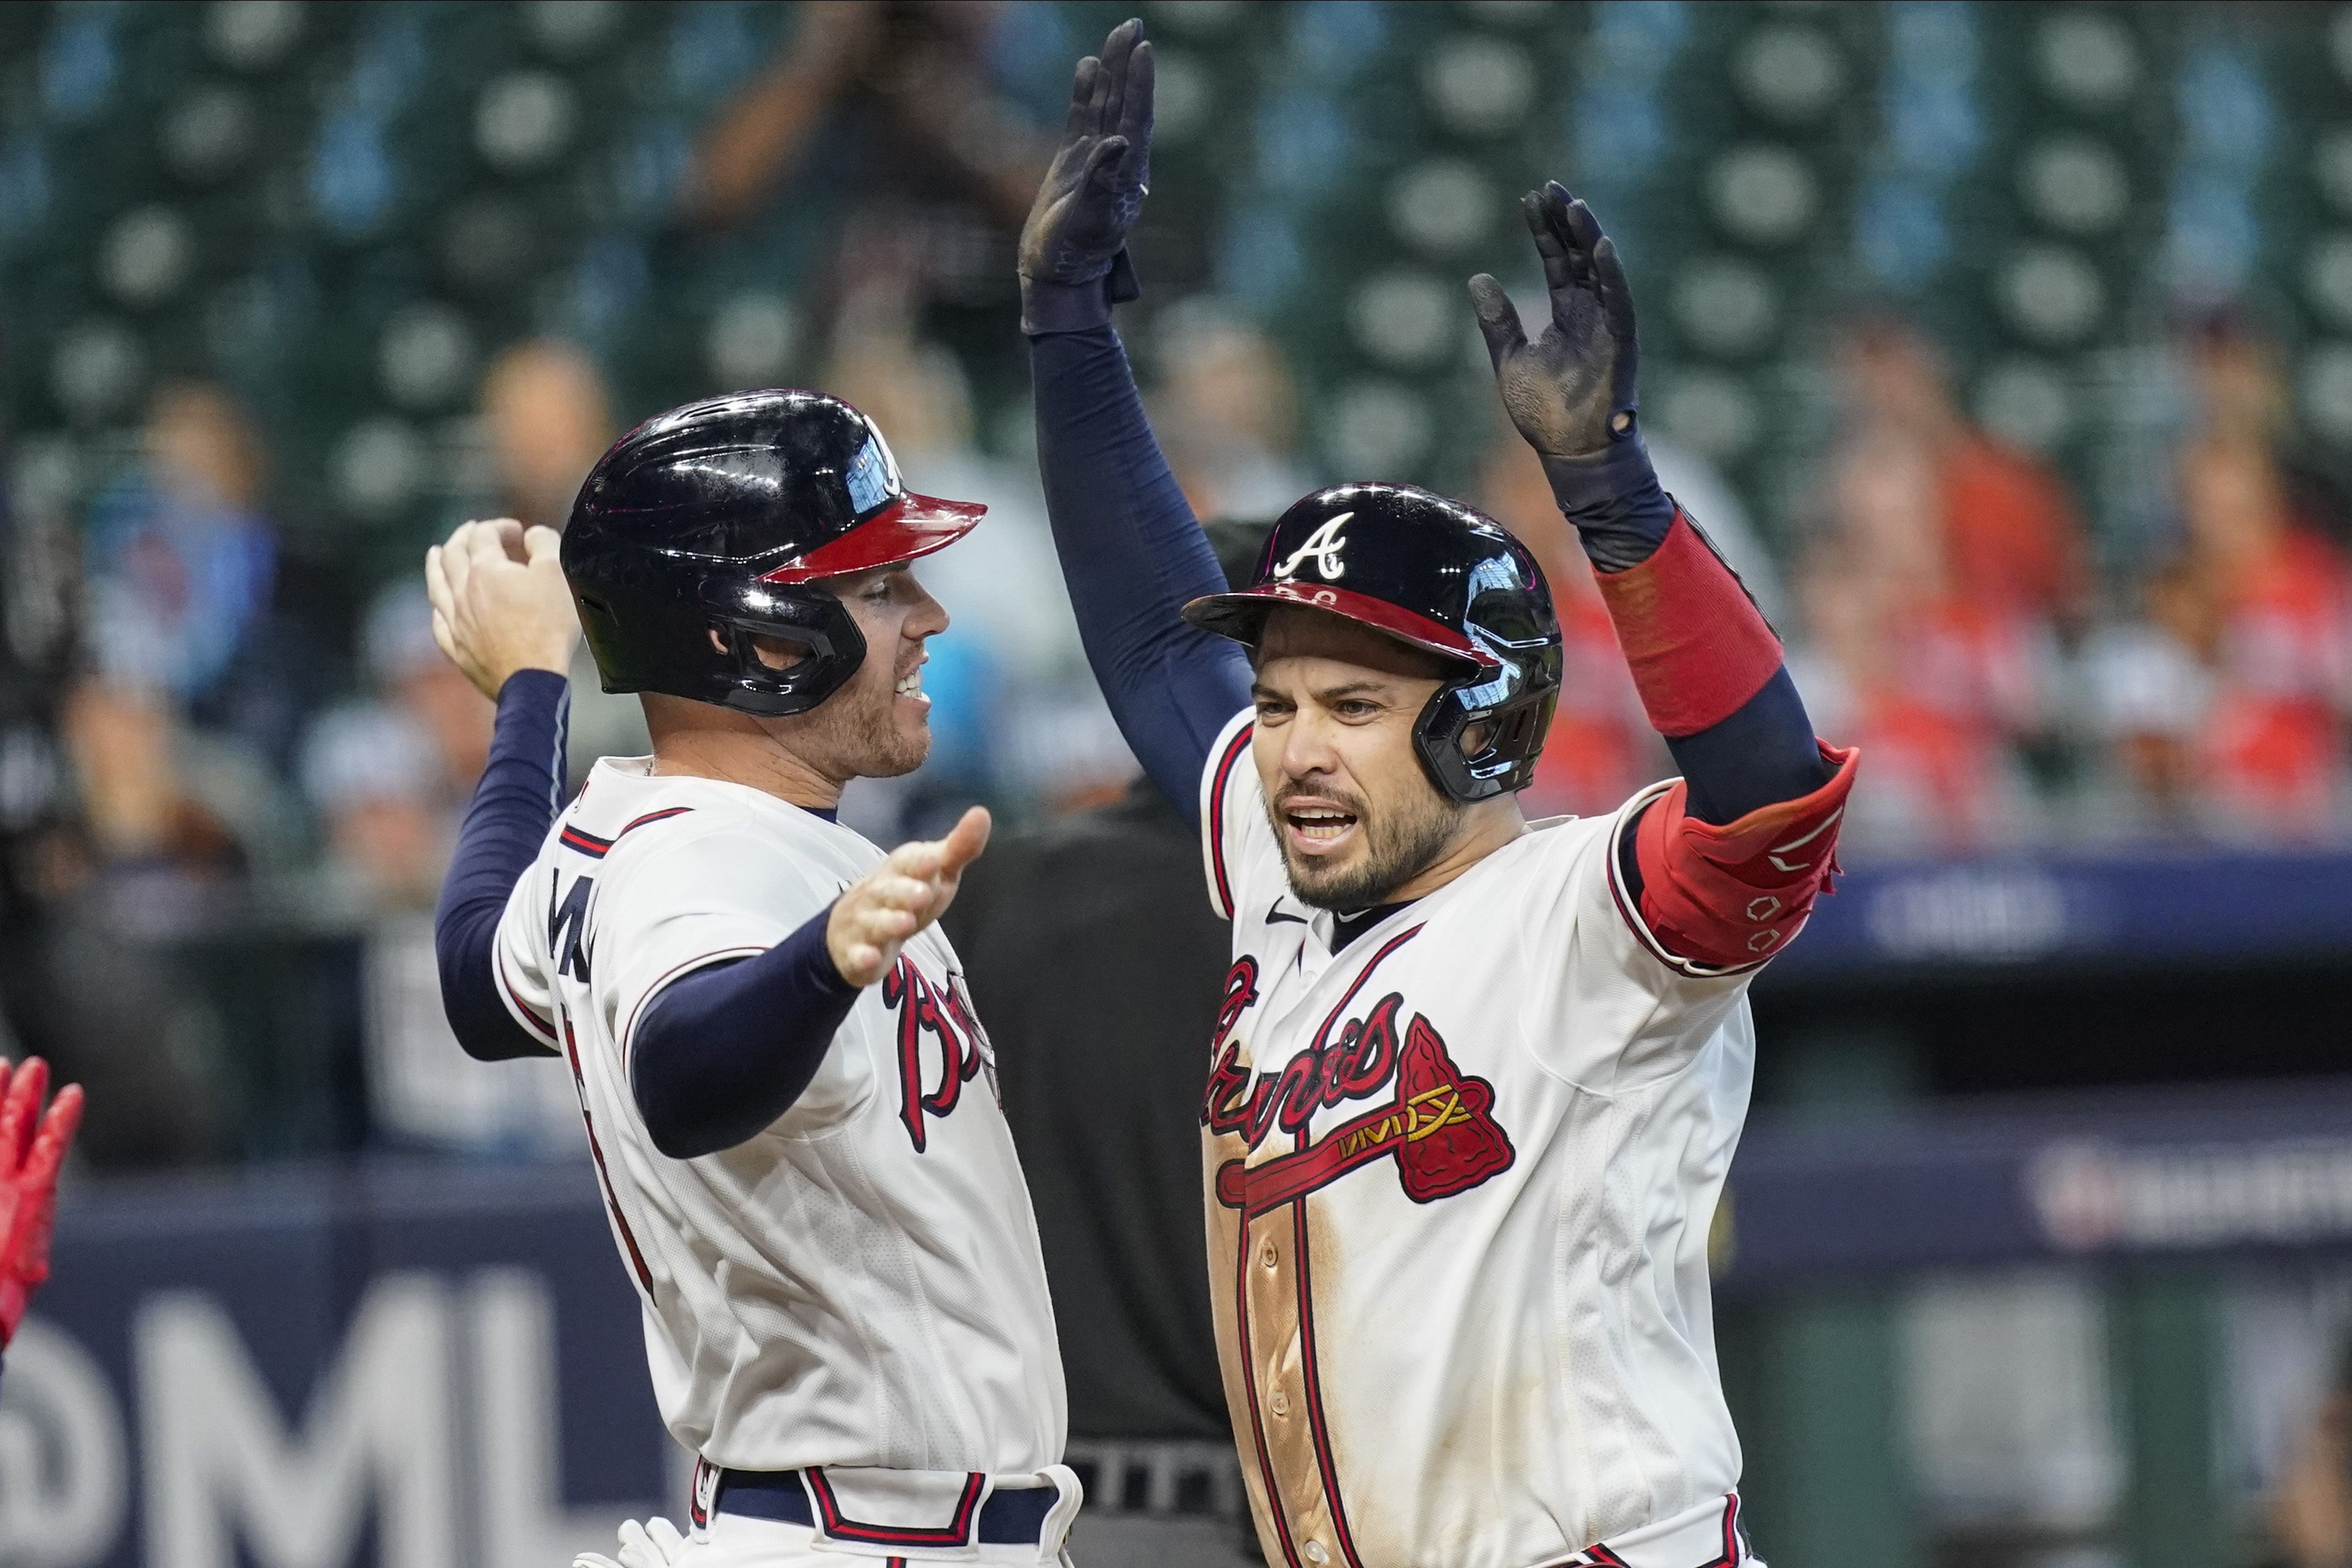 Braves manager Brian Snitker's message after benching Marcell